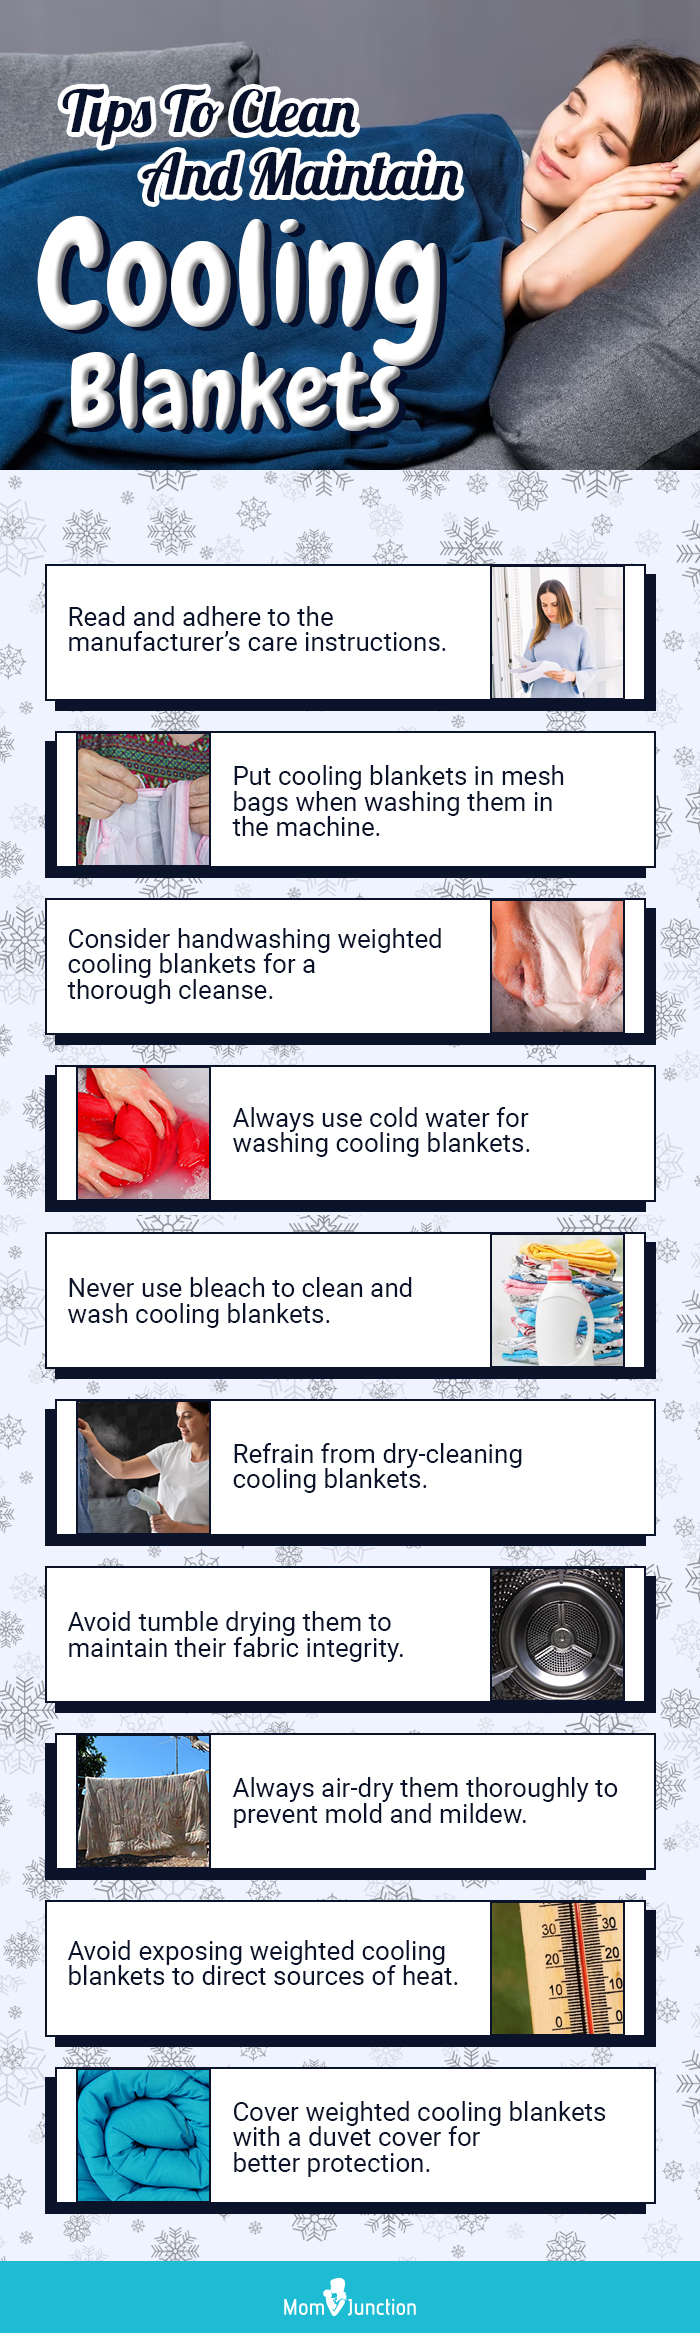 Tips To Clean And Maintain Cooling Blankets(infographic)